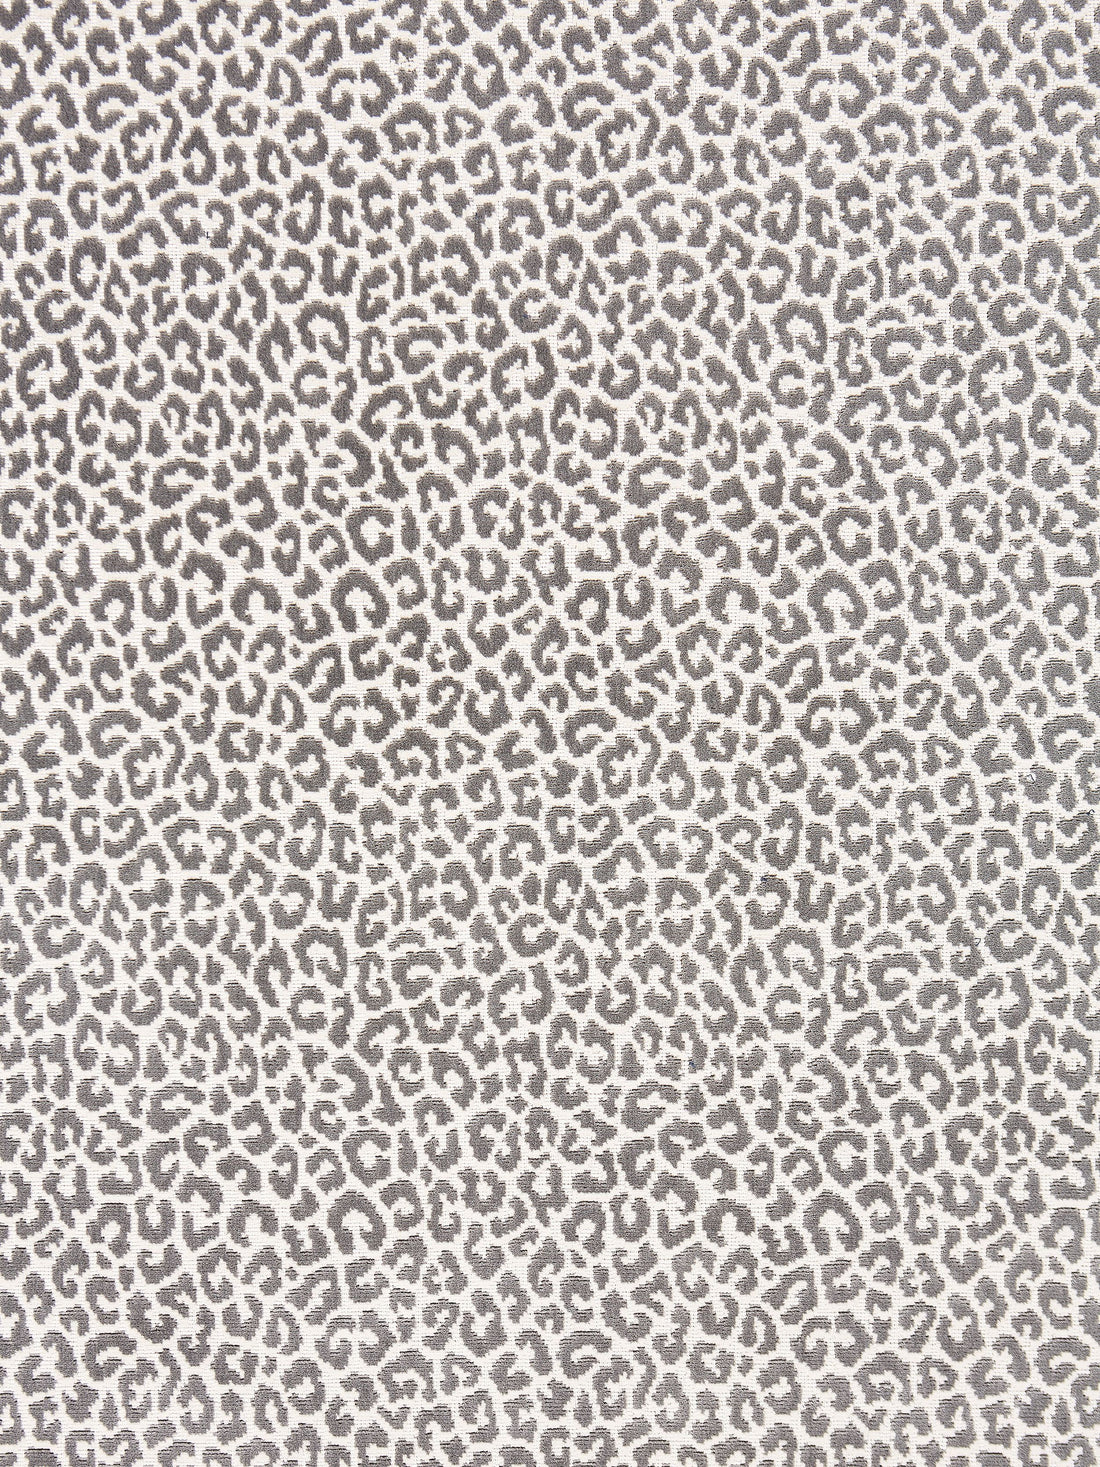 Panthera Velvet fabric in smoke color - pattern number SC 000227037 - by Scalamandre in the Scalamandre Fabrics Book 1 collection